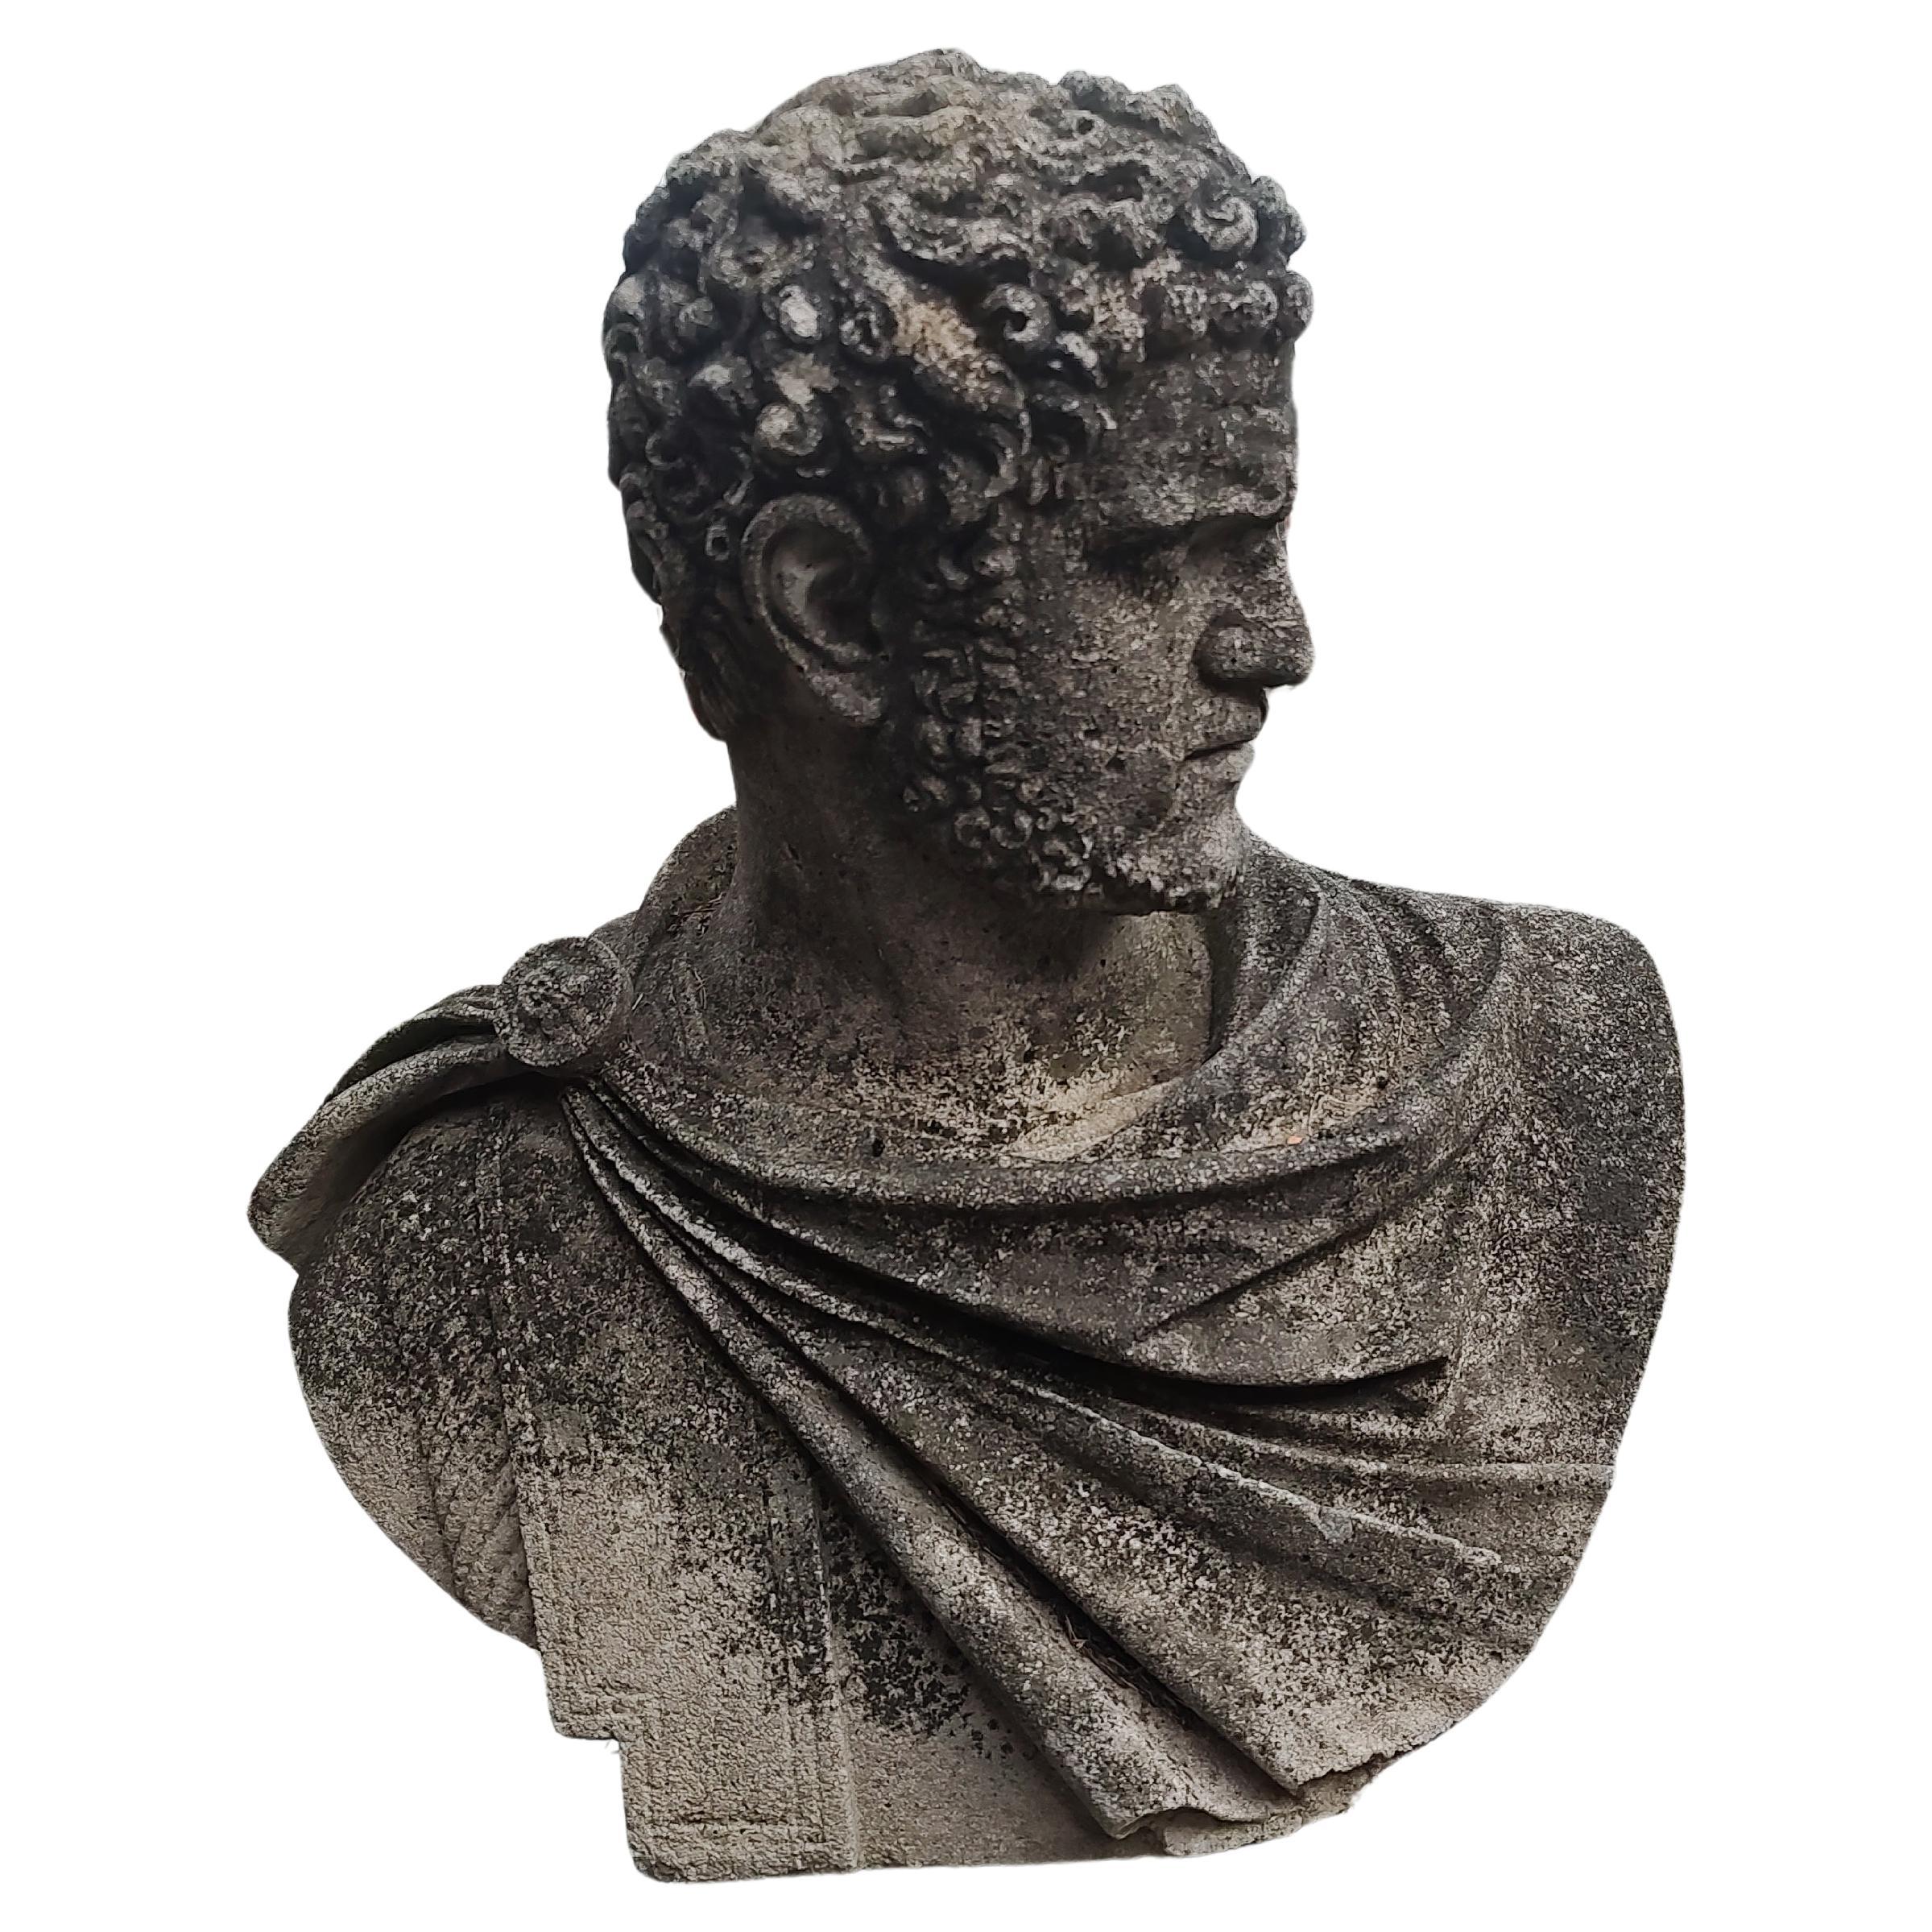 Fabulous cast limestone sculpture bust of a Roman dignitary, possibly Caesar or Augustus. Great detailed casting of stone with an angled pose in typical Roman garb. Fantastic hair! Patina is undisturbed and fabulous, even throughout. Pedestal not